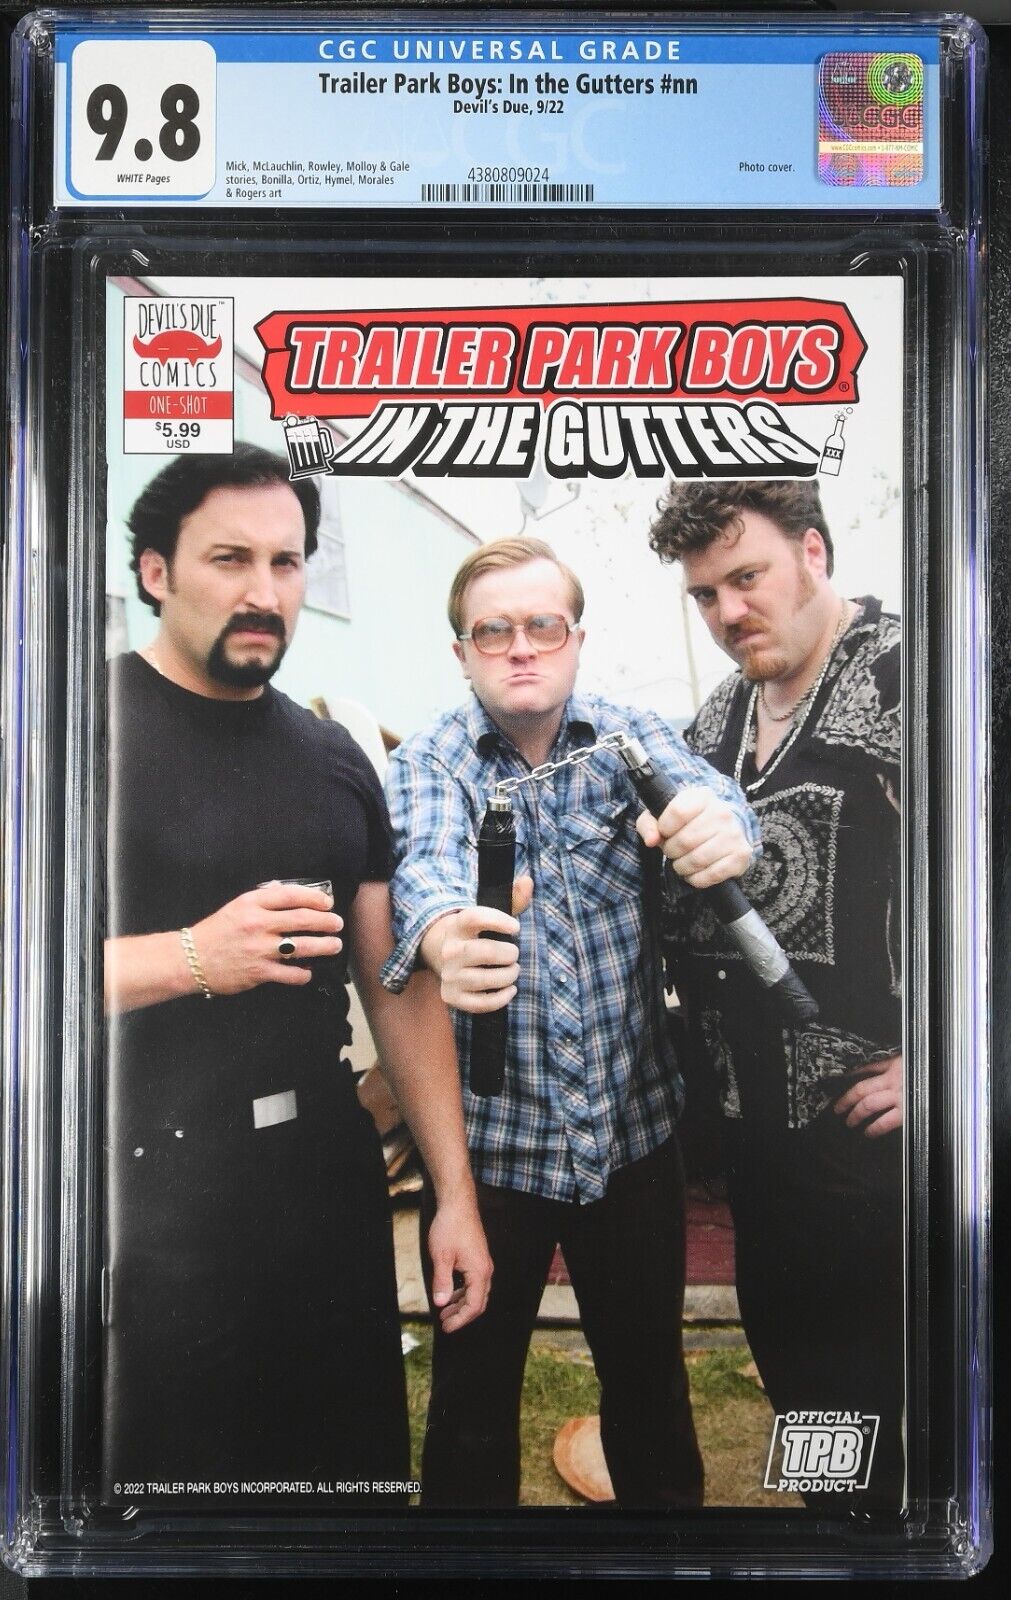 Trailer Park Boys in the Gutters #1 CGC 9.8 Photo Main Cover A 2022 Devil's Due